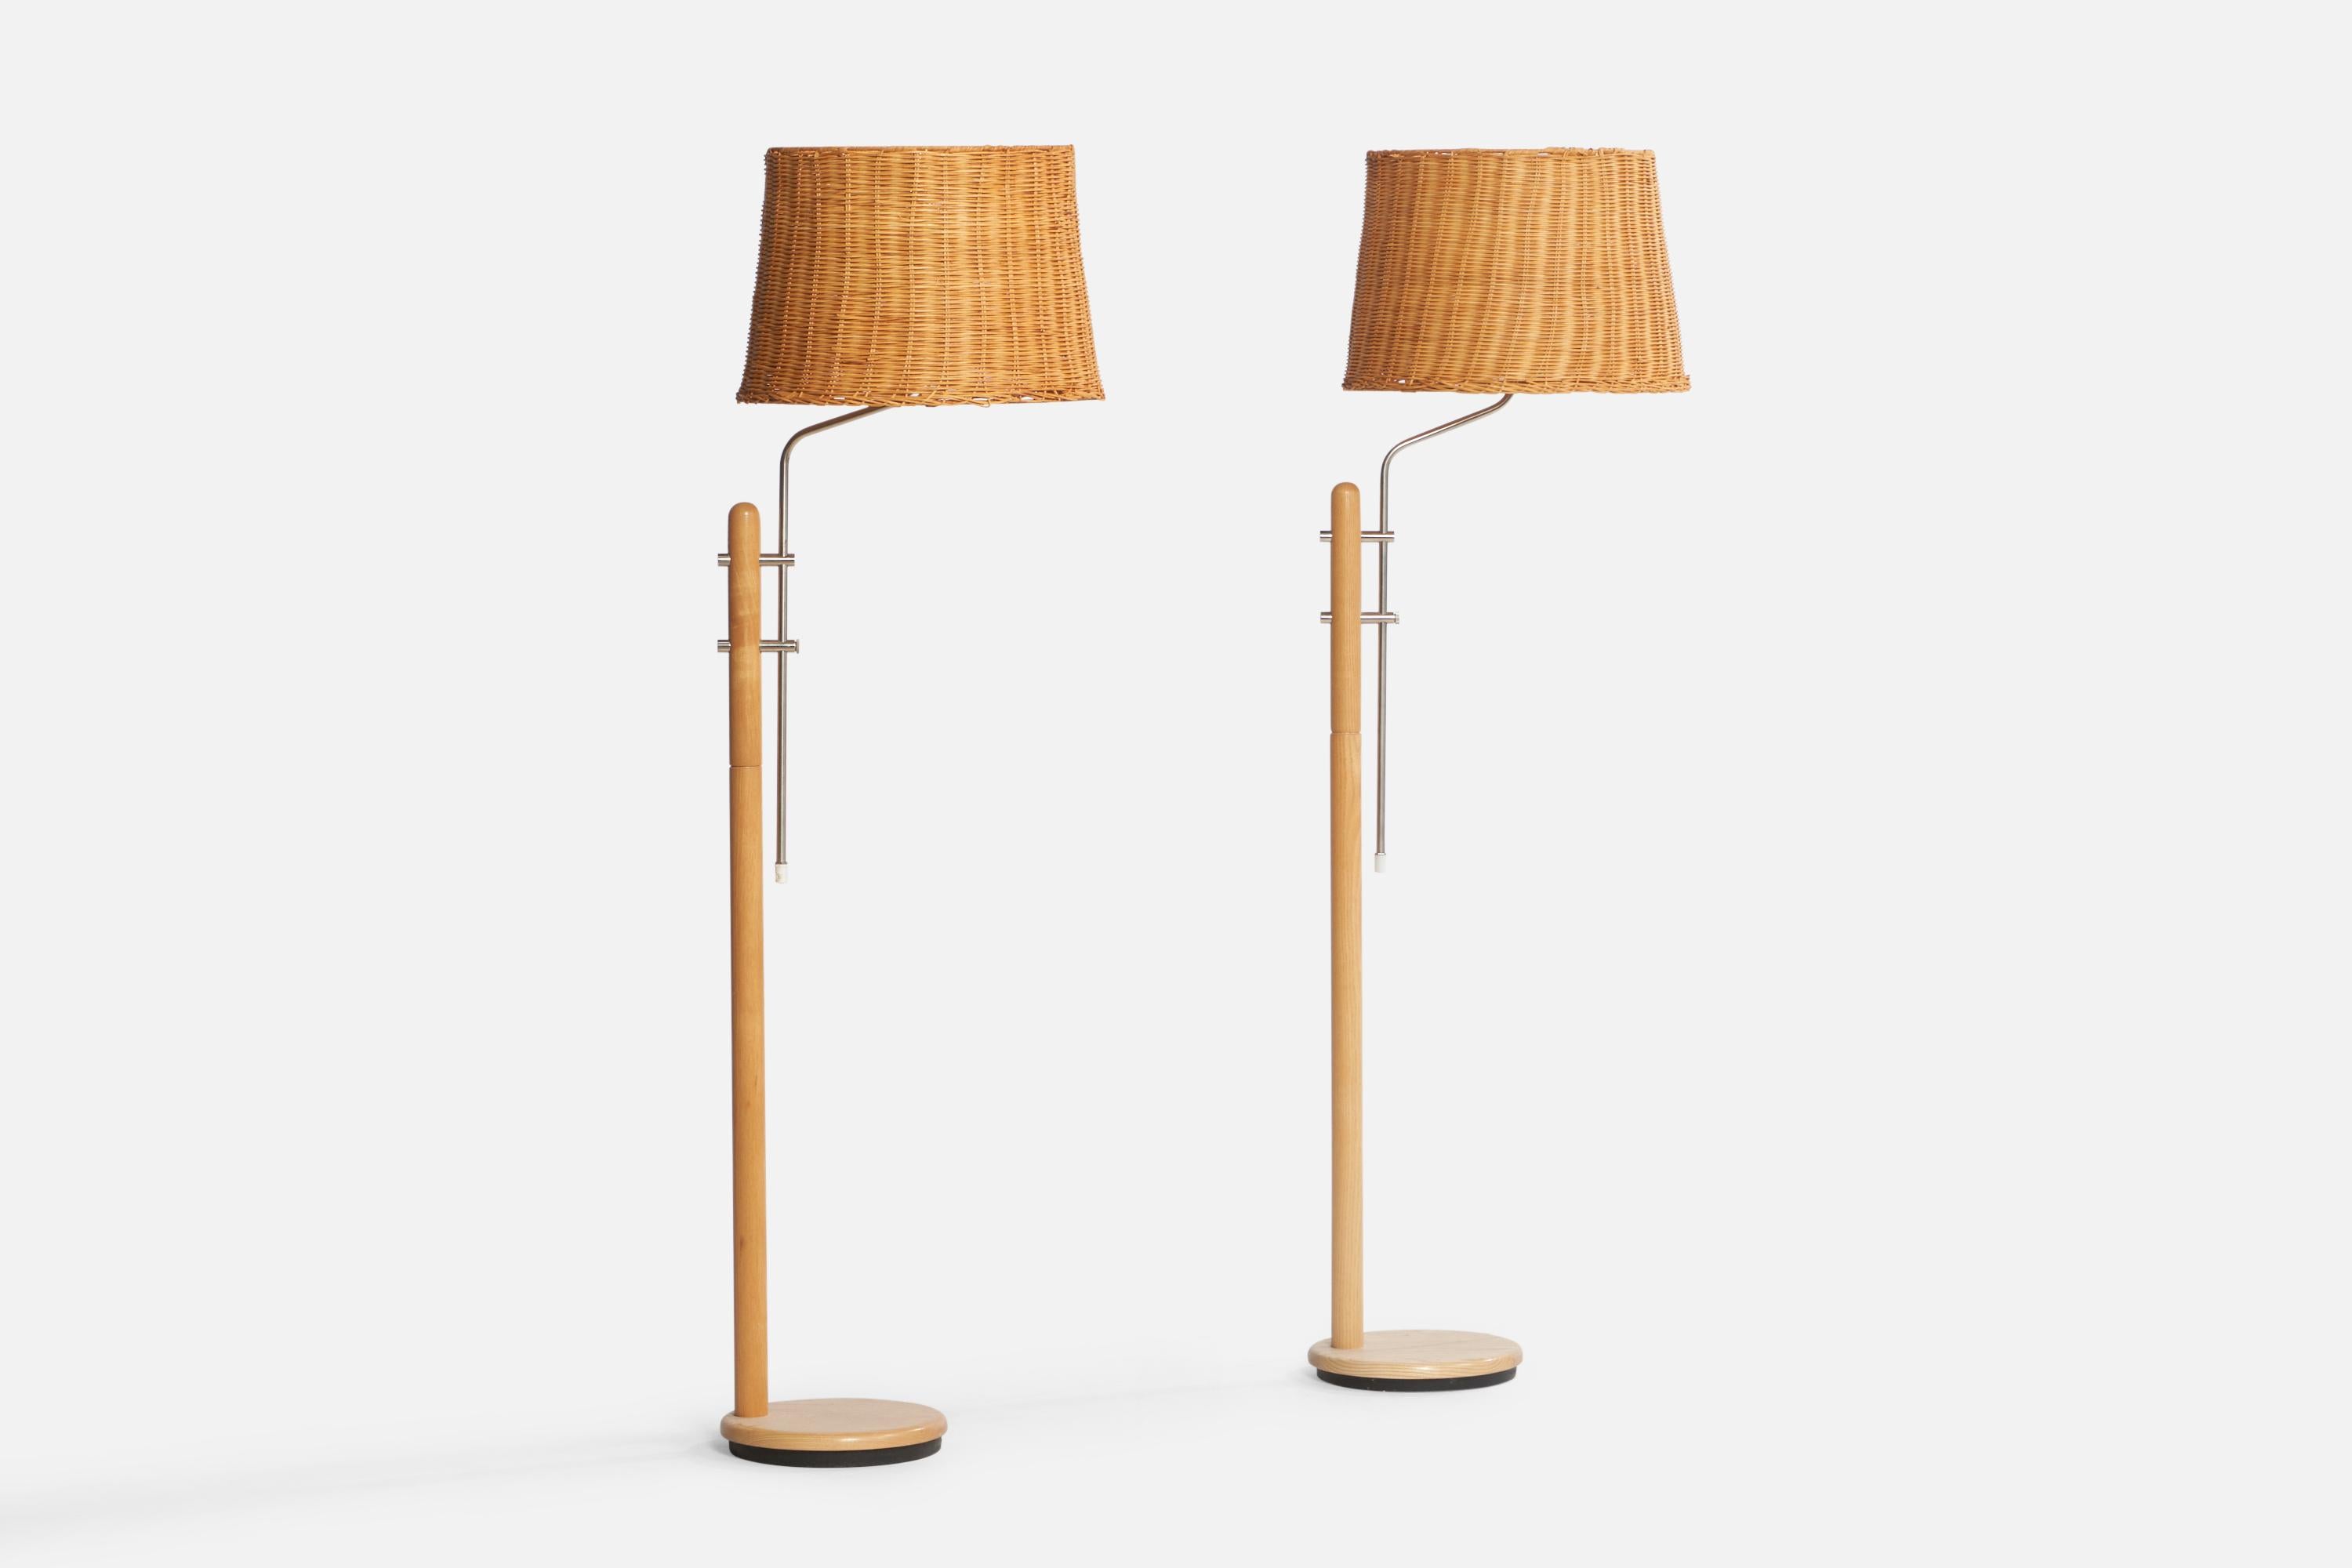 A pair of adjustable pine, steel and rattan floor lamps designed and produced in Sweden, c. 1970s.

Overall Dimensions (inches): 60” H x 16.5” W x 18” D. Stated dimensions include shades. 

Note slight variation in wood color.
Bulb Specifications: